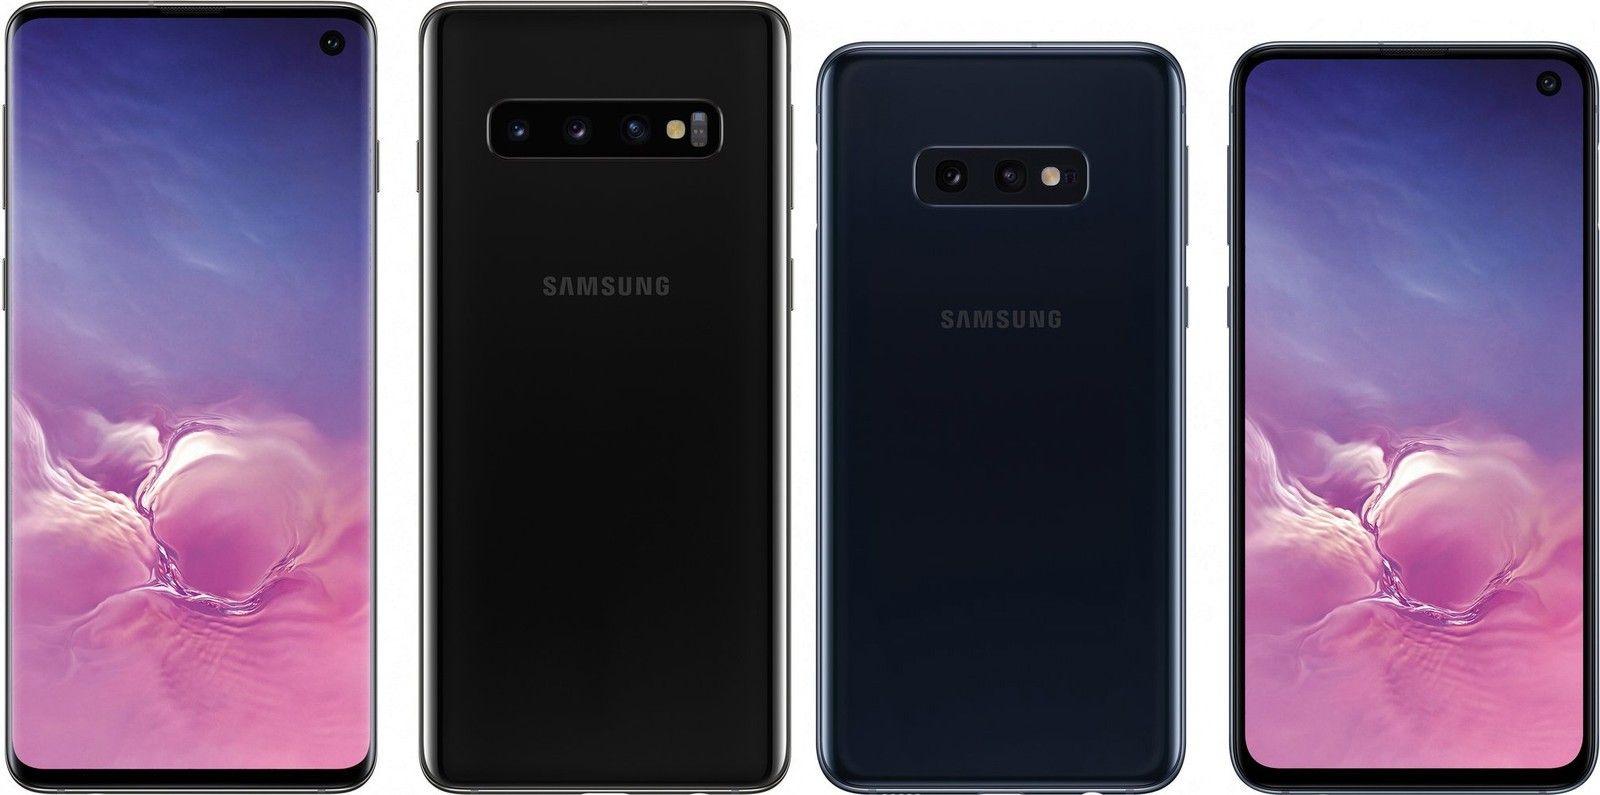 Attached Two Red XS Logo - Samsung Galaxy S10: News, Rumors, Release Date, Specs, and More ...